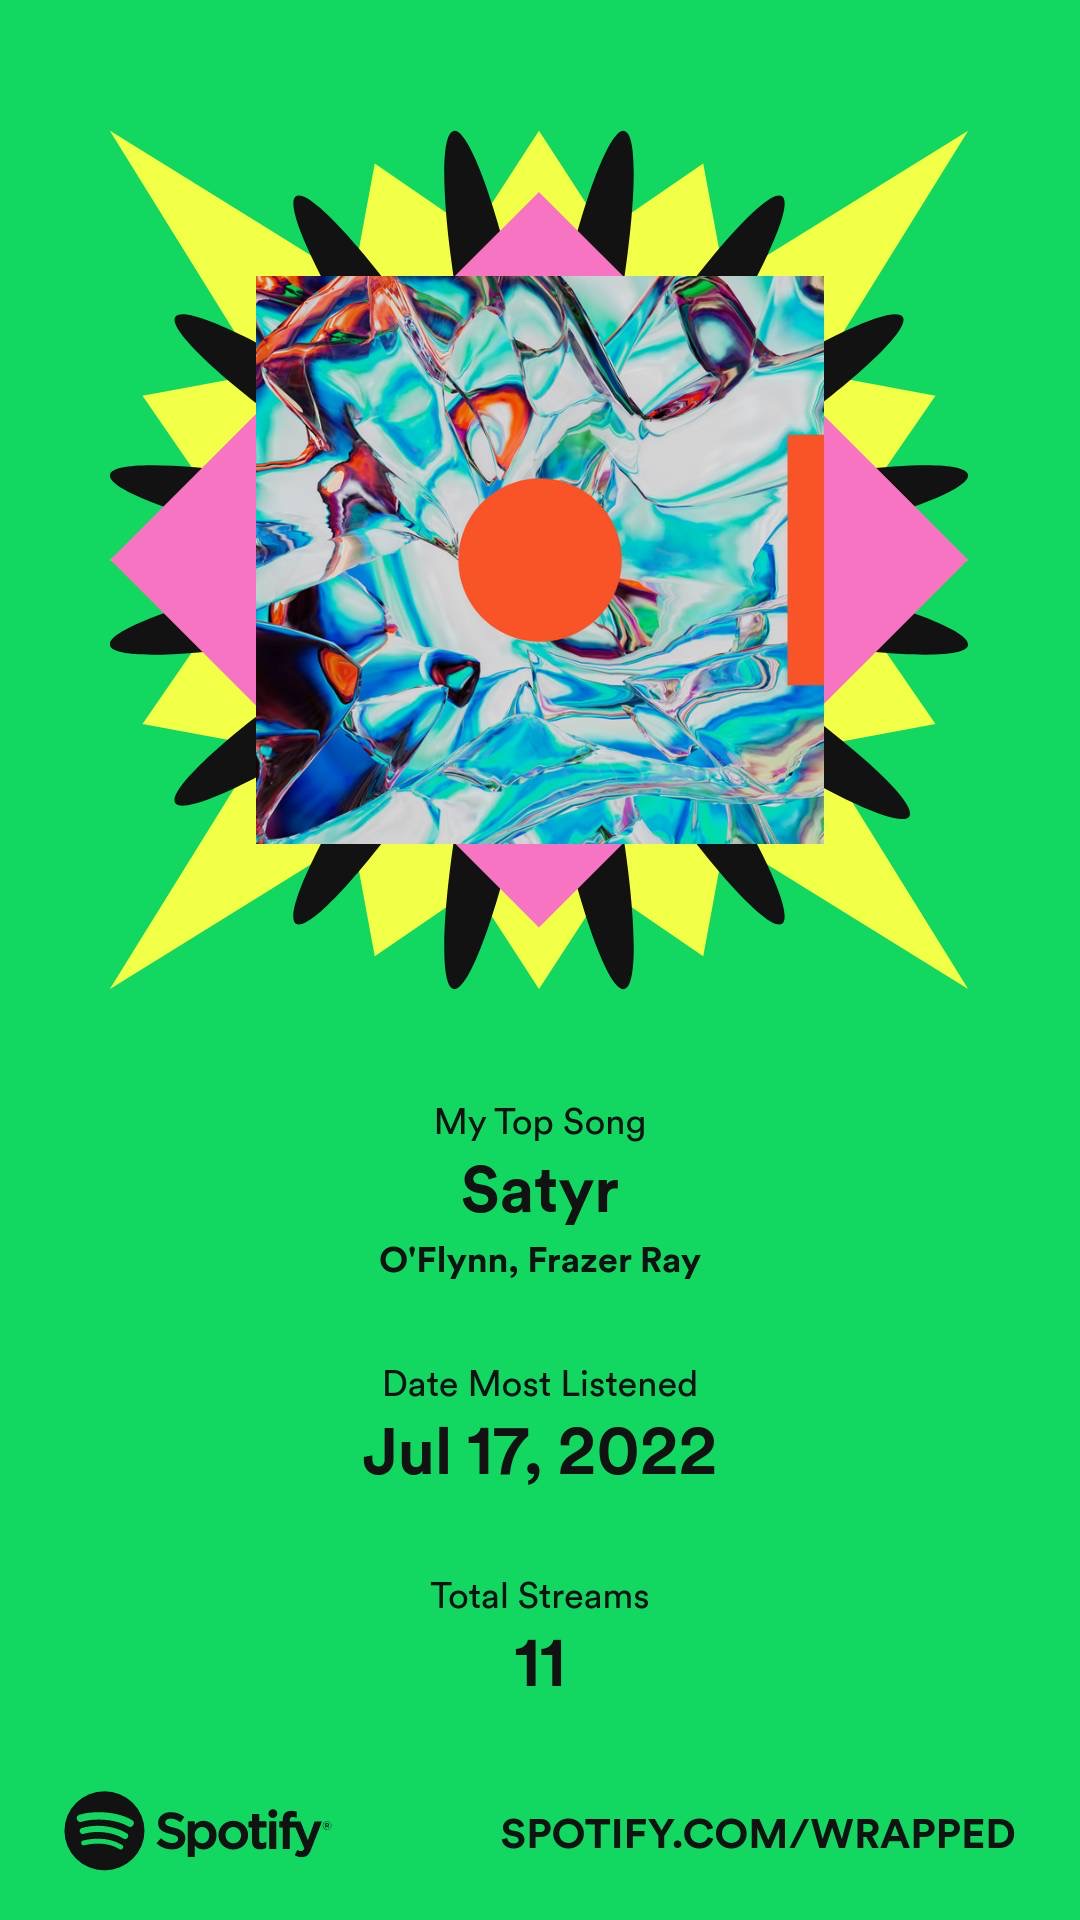 Spotify Wrapped screen showing the album art for O’Flynn and Frazer Ray’s album Shimmer, listing the song Satyr as my top song, with the date most listened on July 17, 2022 and 11 total streams.